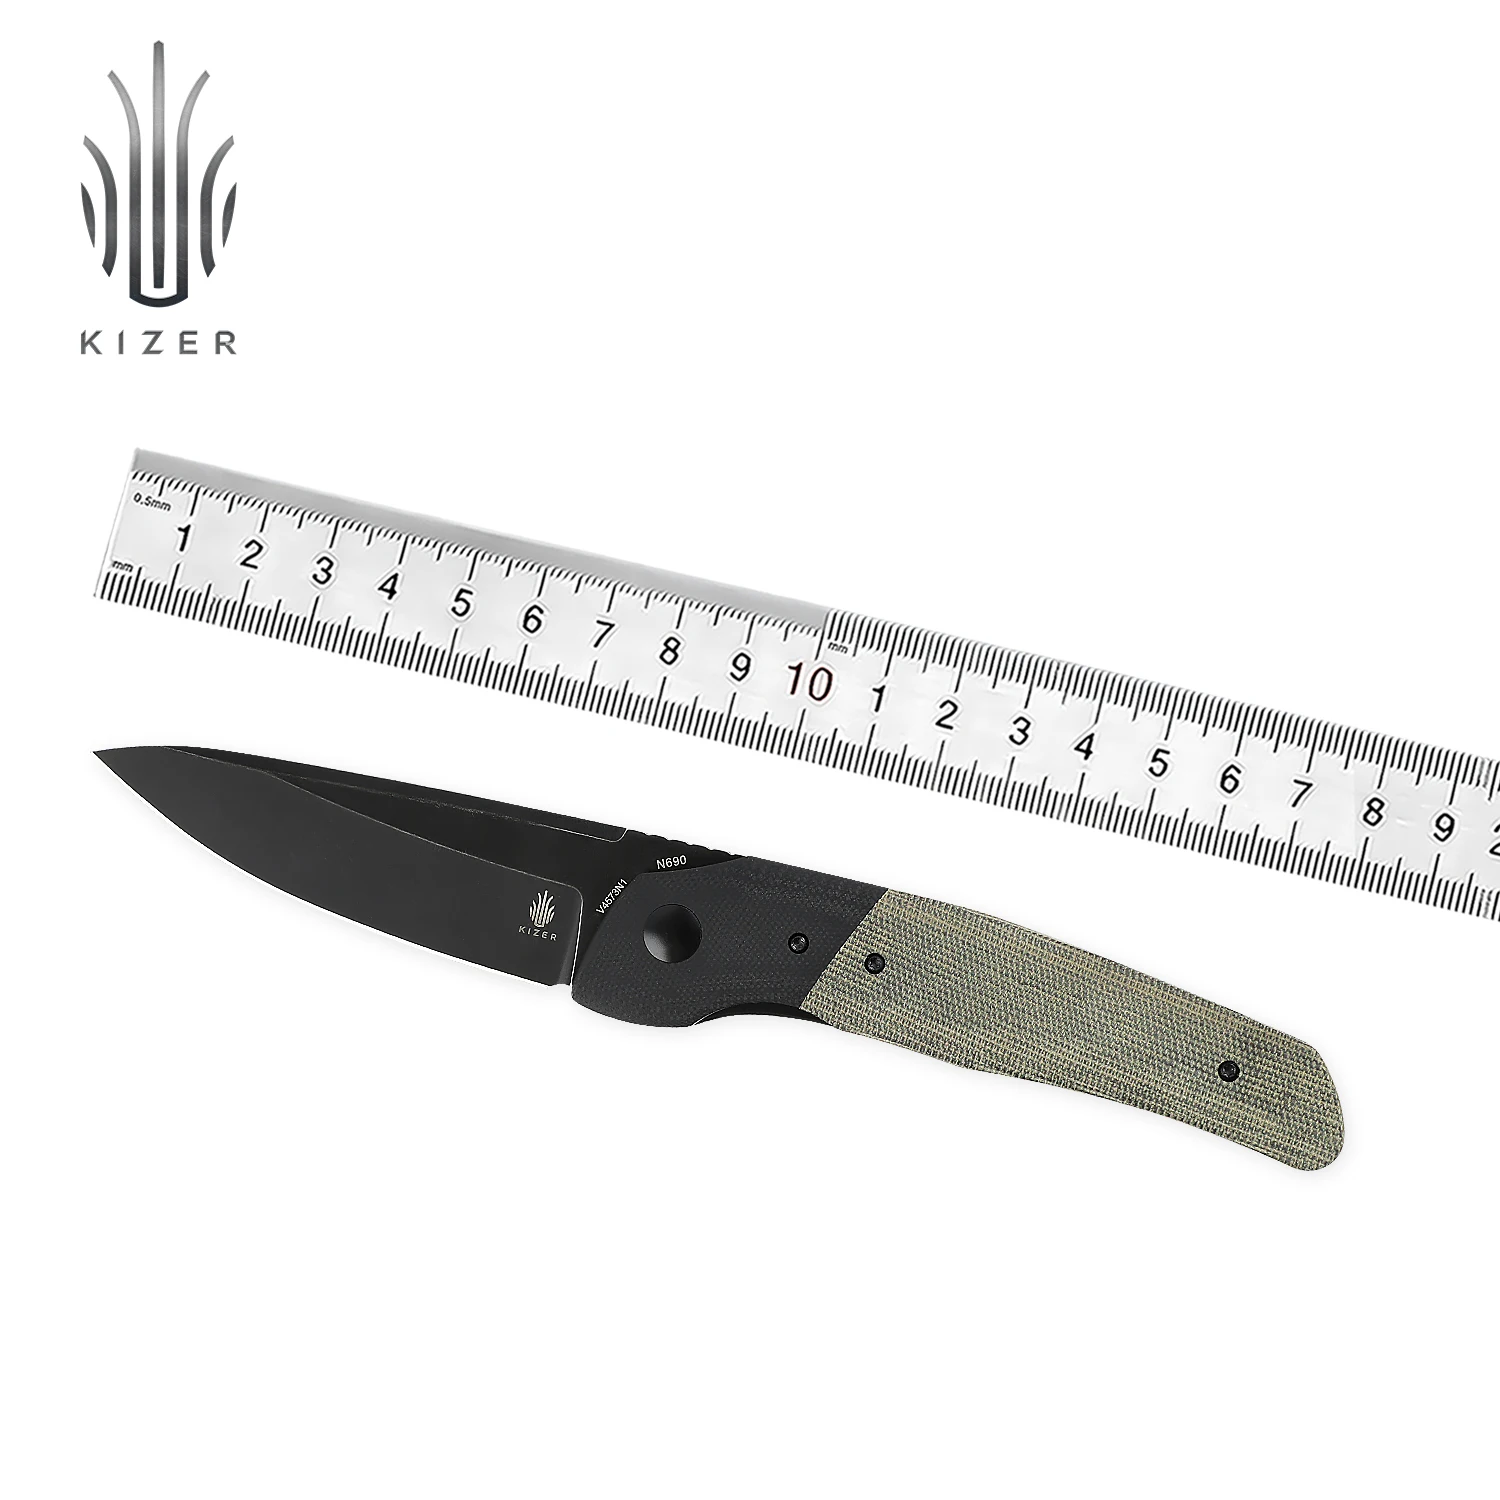 

Kizer Knife Folding In-Yan V4573N1 Green N690 G10 Handle Outdoor Survival Hunting Camping Knives 2021 New Tactical Knife Flipper